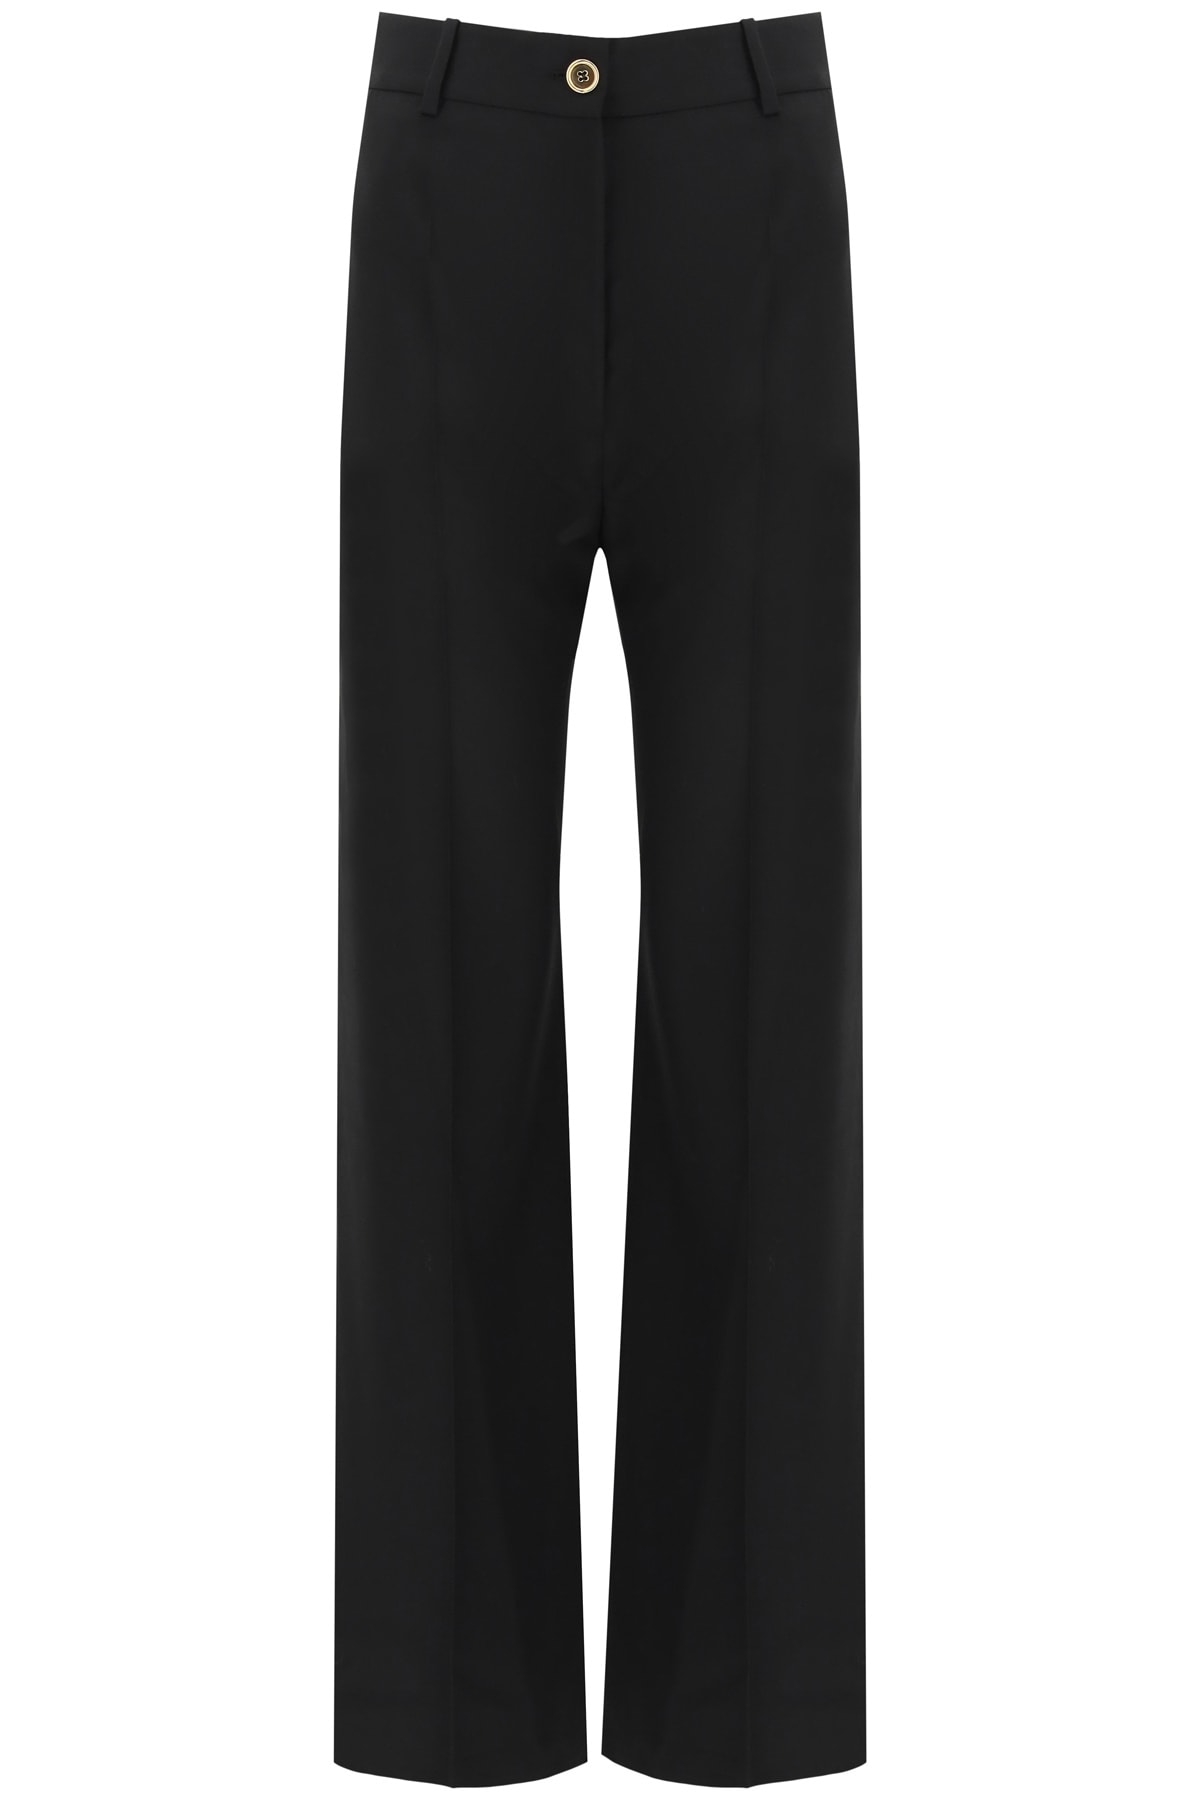 Patou Eco-sustainable Wool Twill Trousers